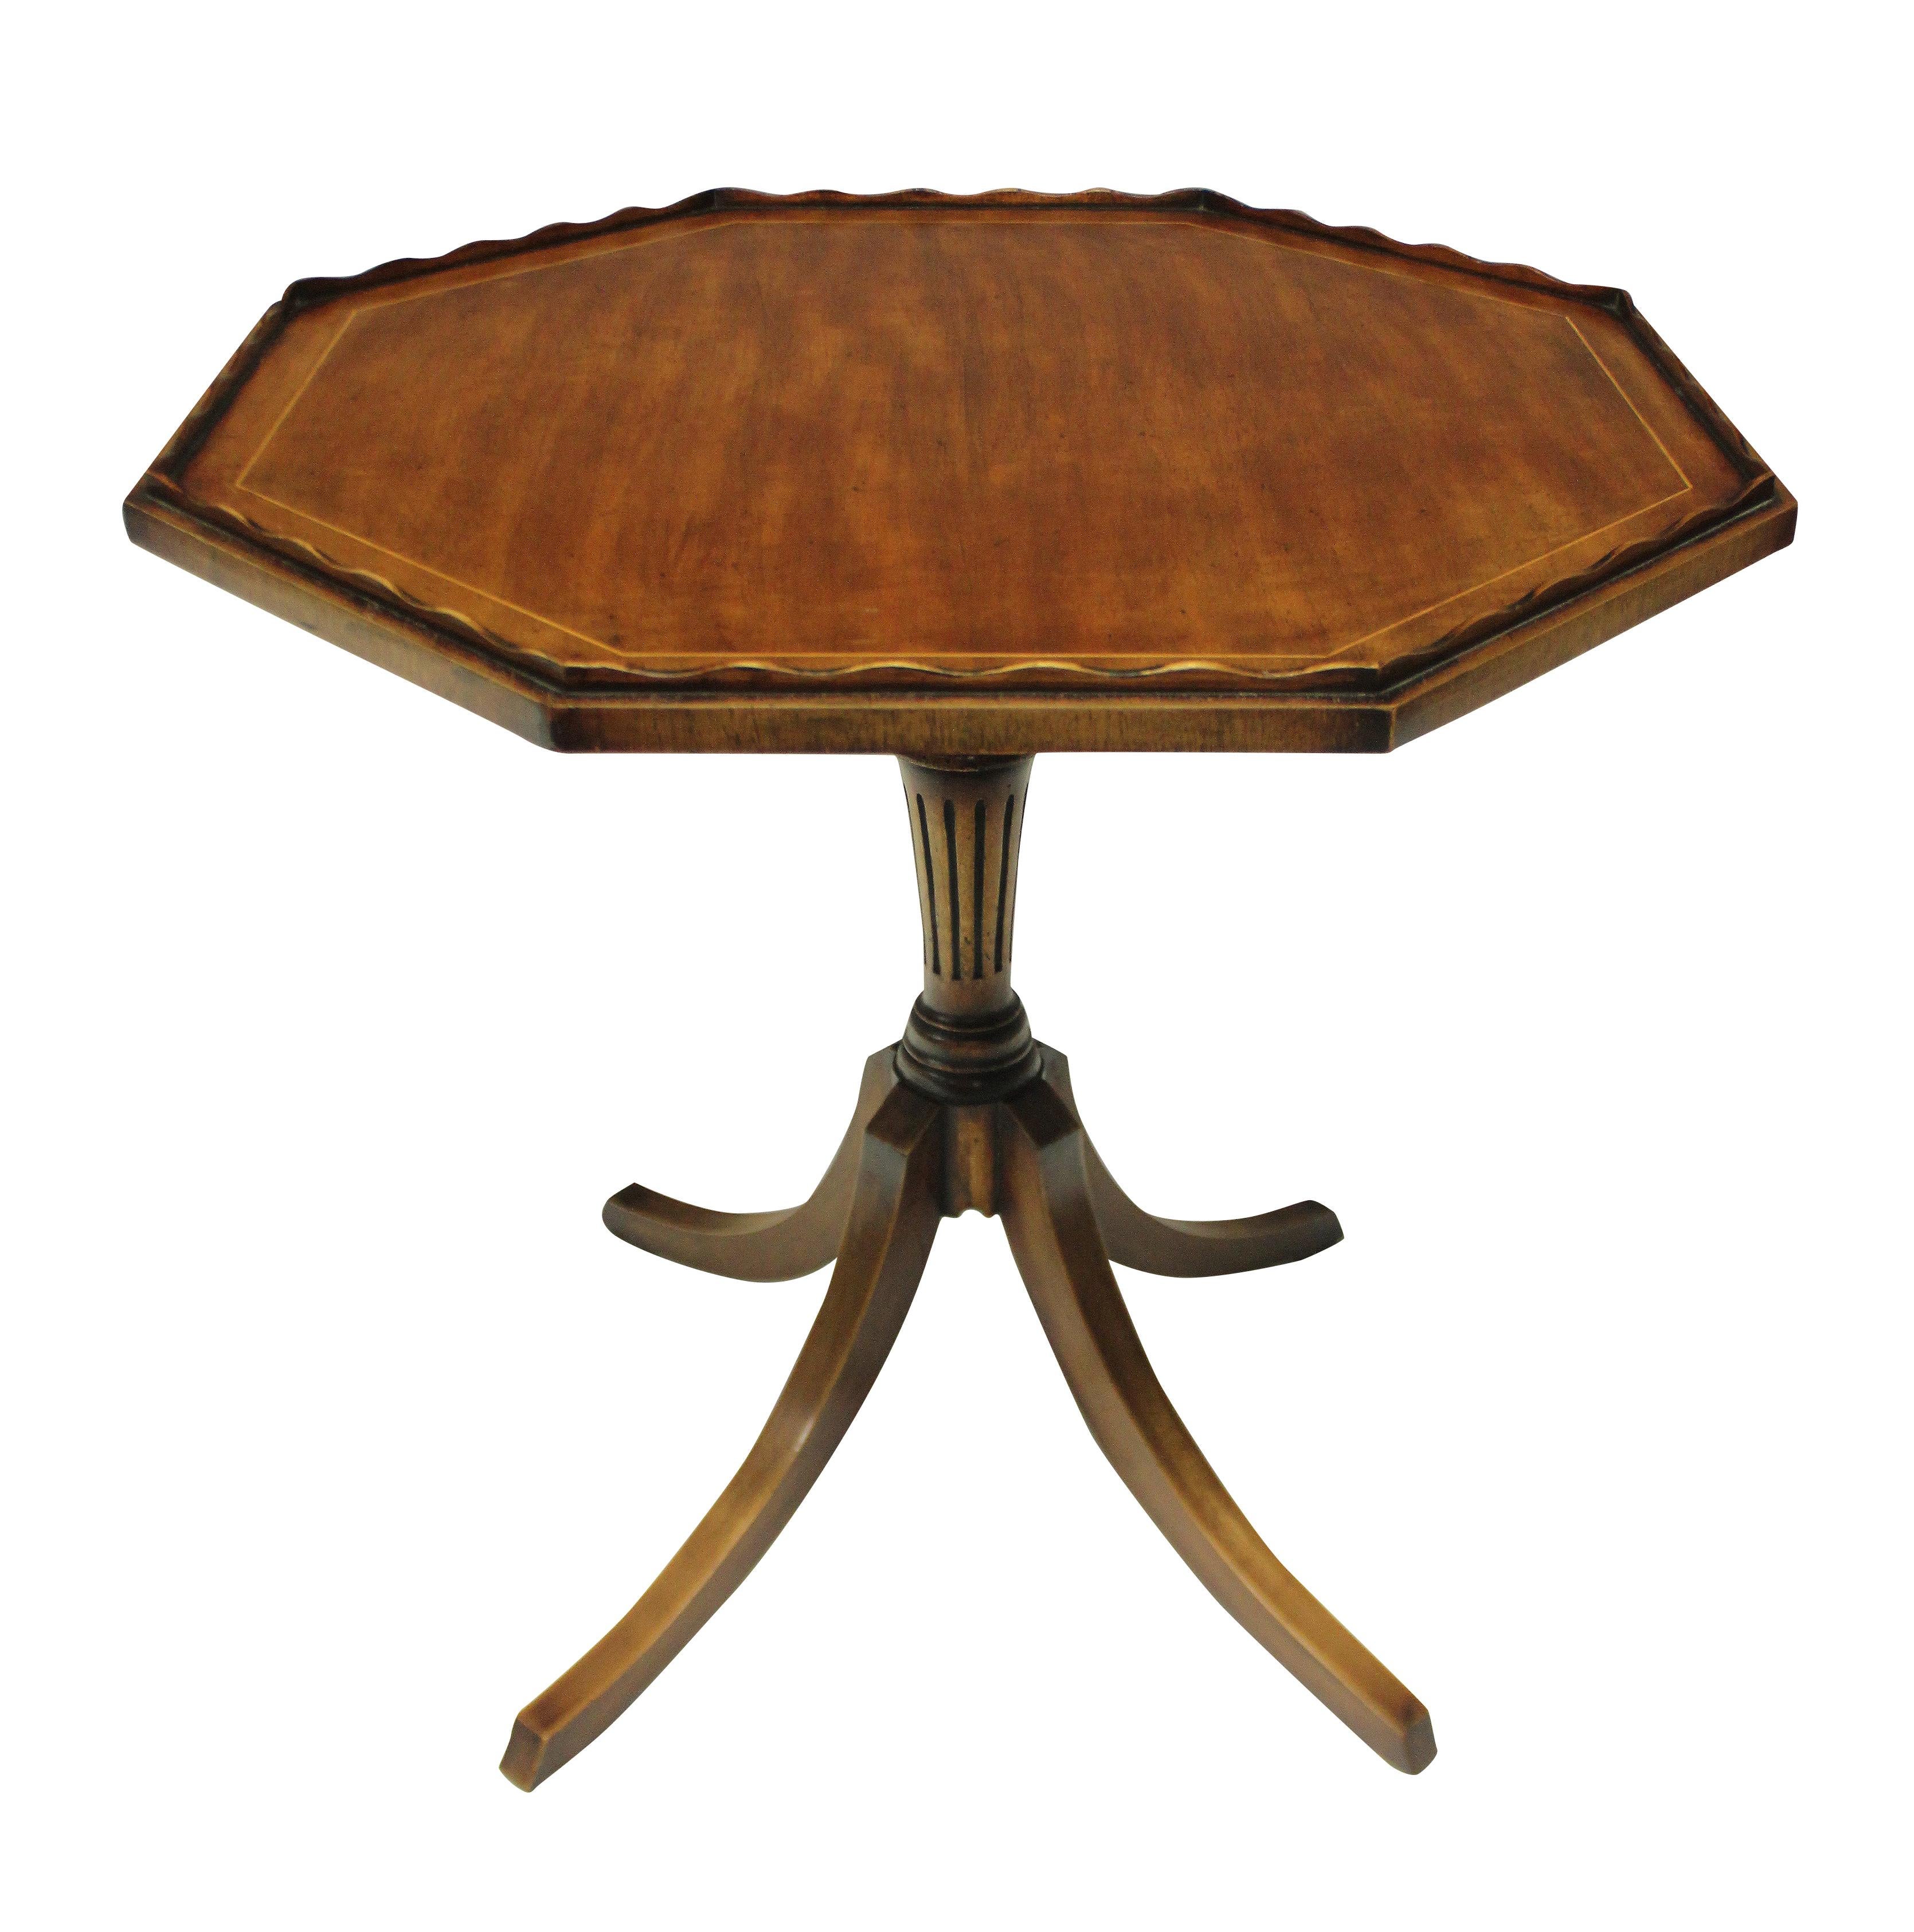 A pair of English mahogany side tables with good patina, each with an octagonal top with pie crust edge. One table with a tilt-top and the other with two tiers, both with box wood stringing.
Measures: 56cm high x 60 diameter (tilt-top) x 68cm high